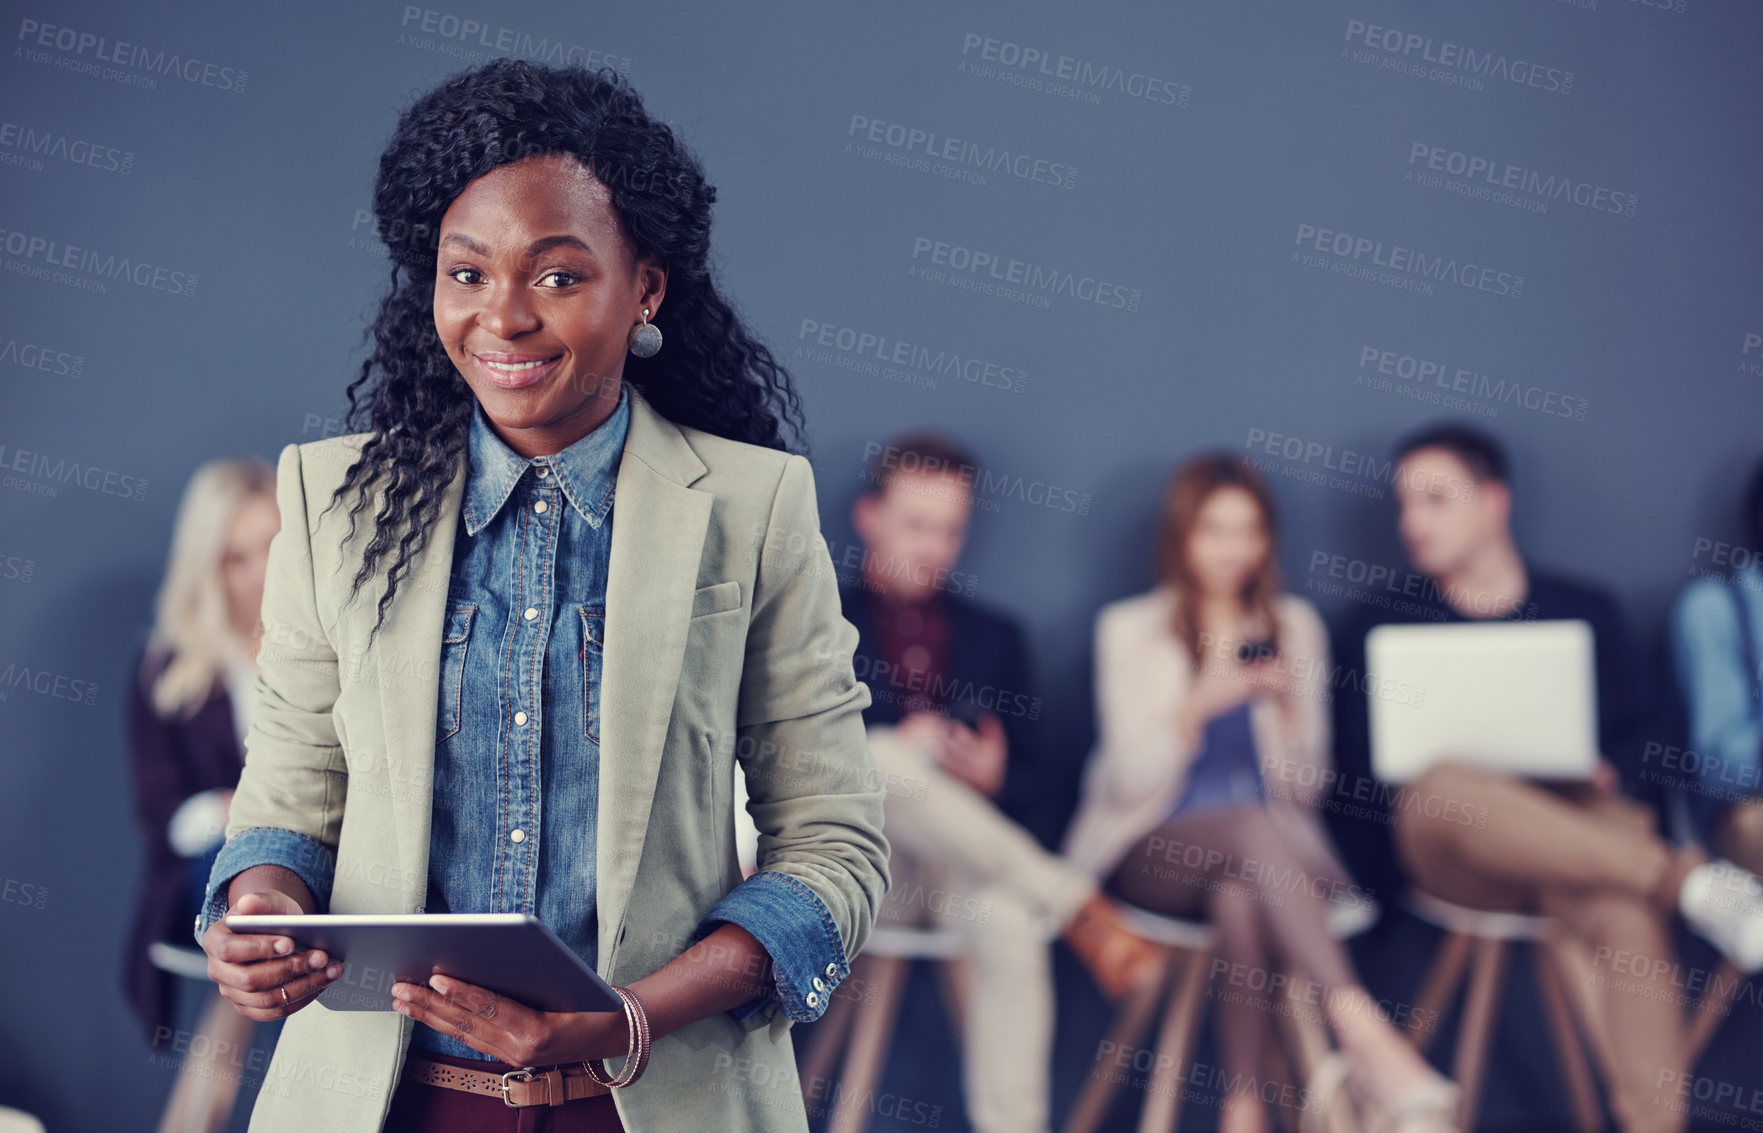 Buy stock photo Cropped portrait of an attractive young businesswoman using a tablet with her colleagues in the background